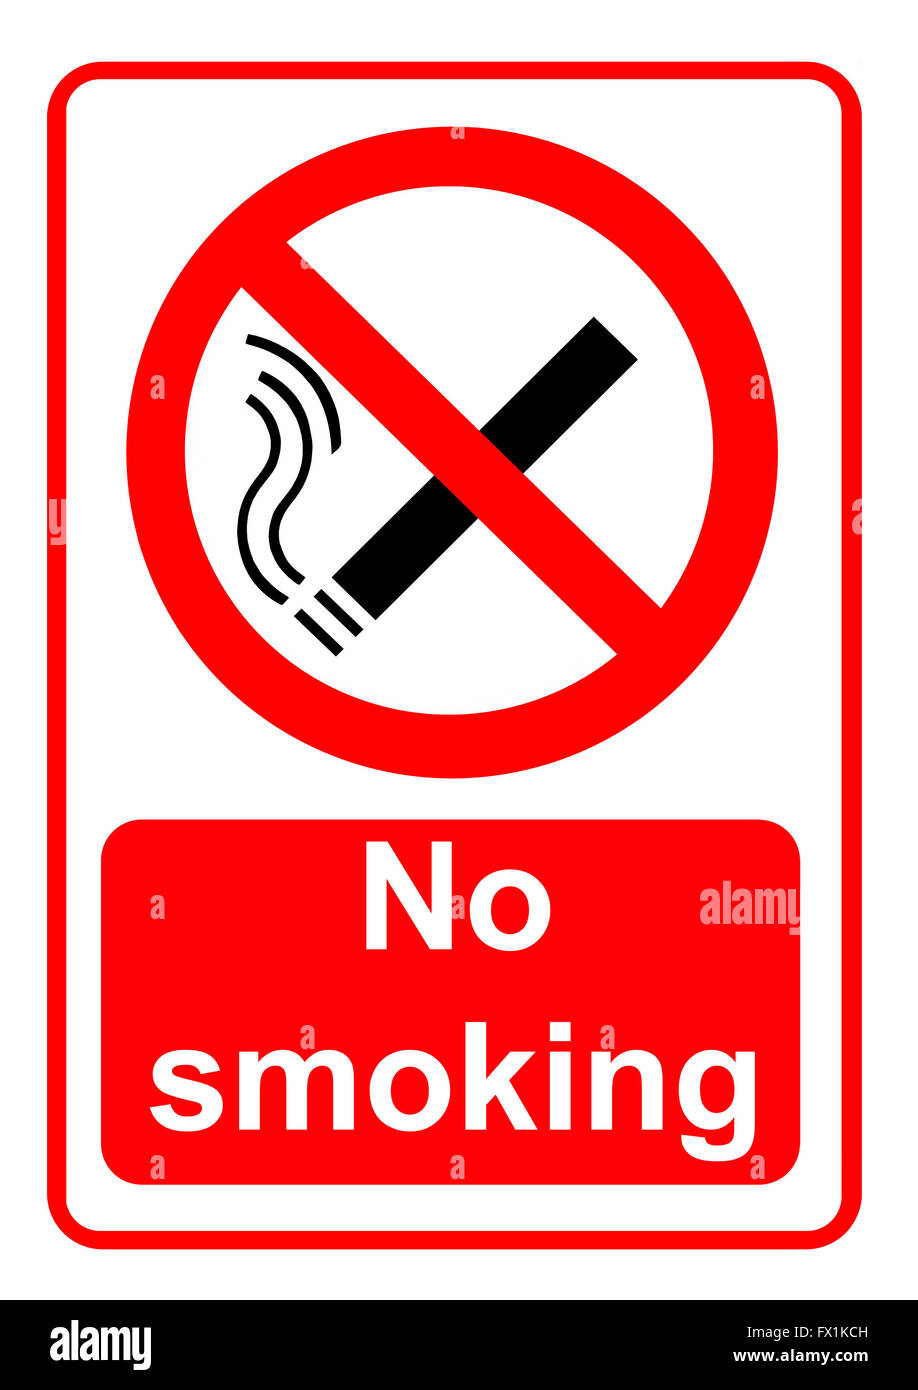 No smoking allowed in this area sign Stock Photo